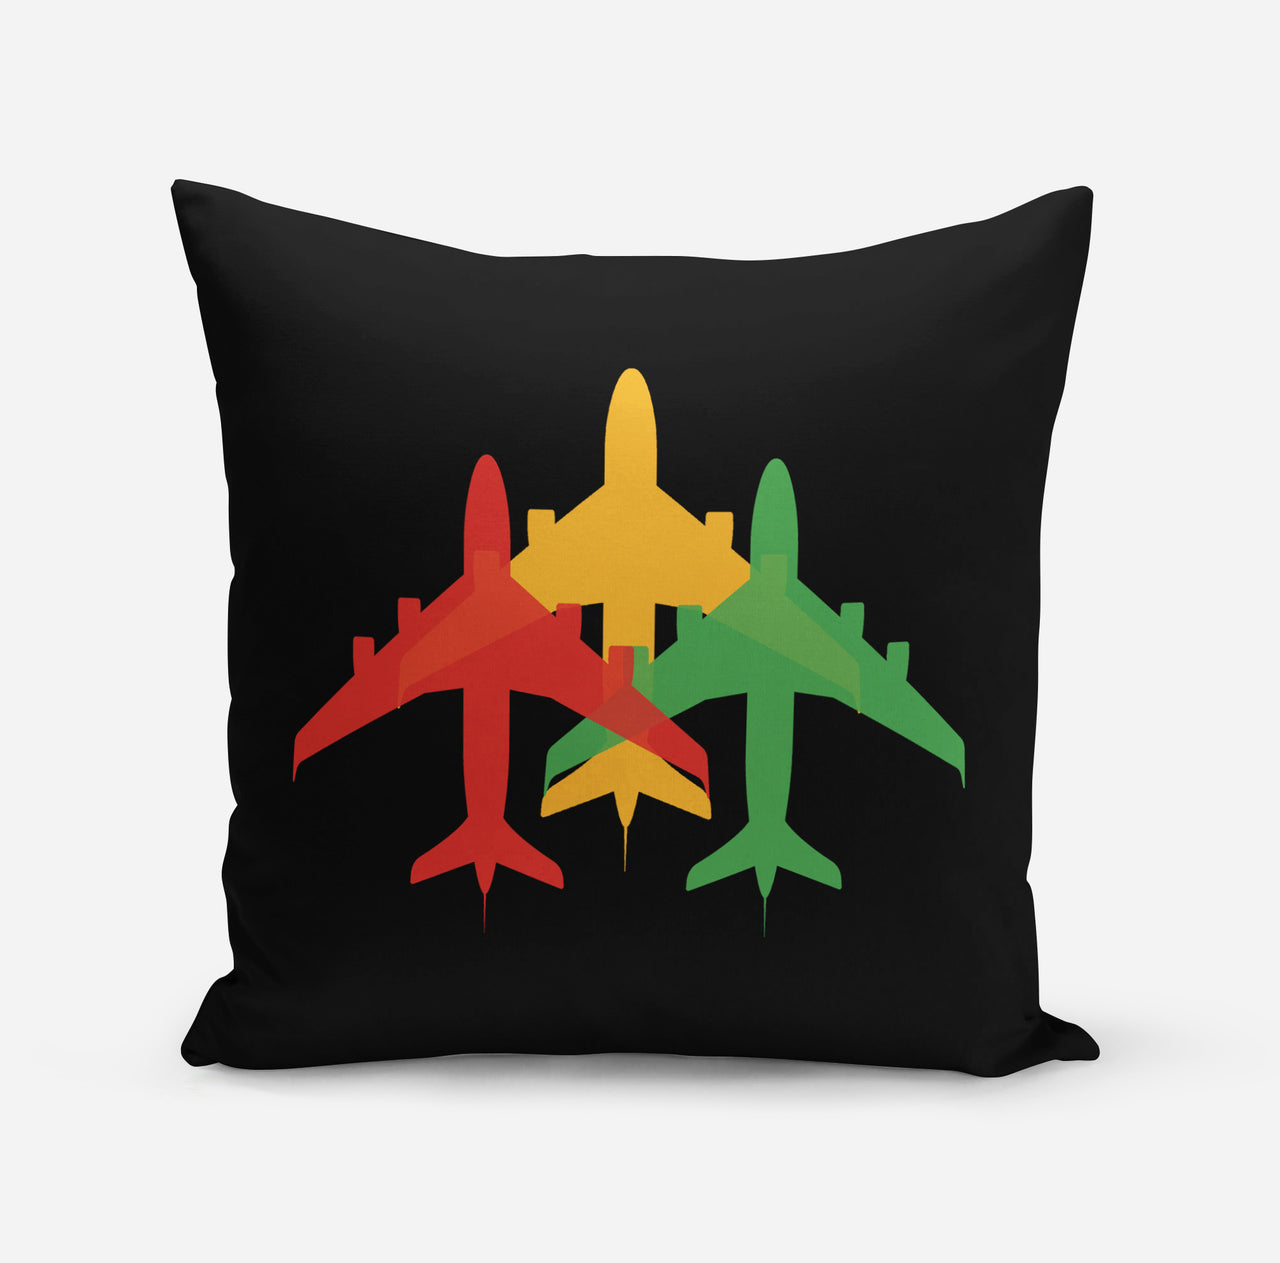 Colourful 3 Airplanes Designed Pillows